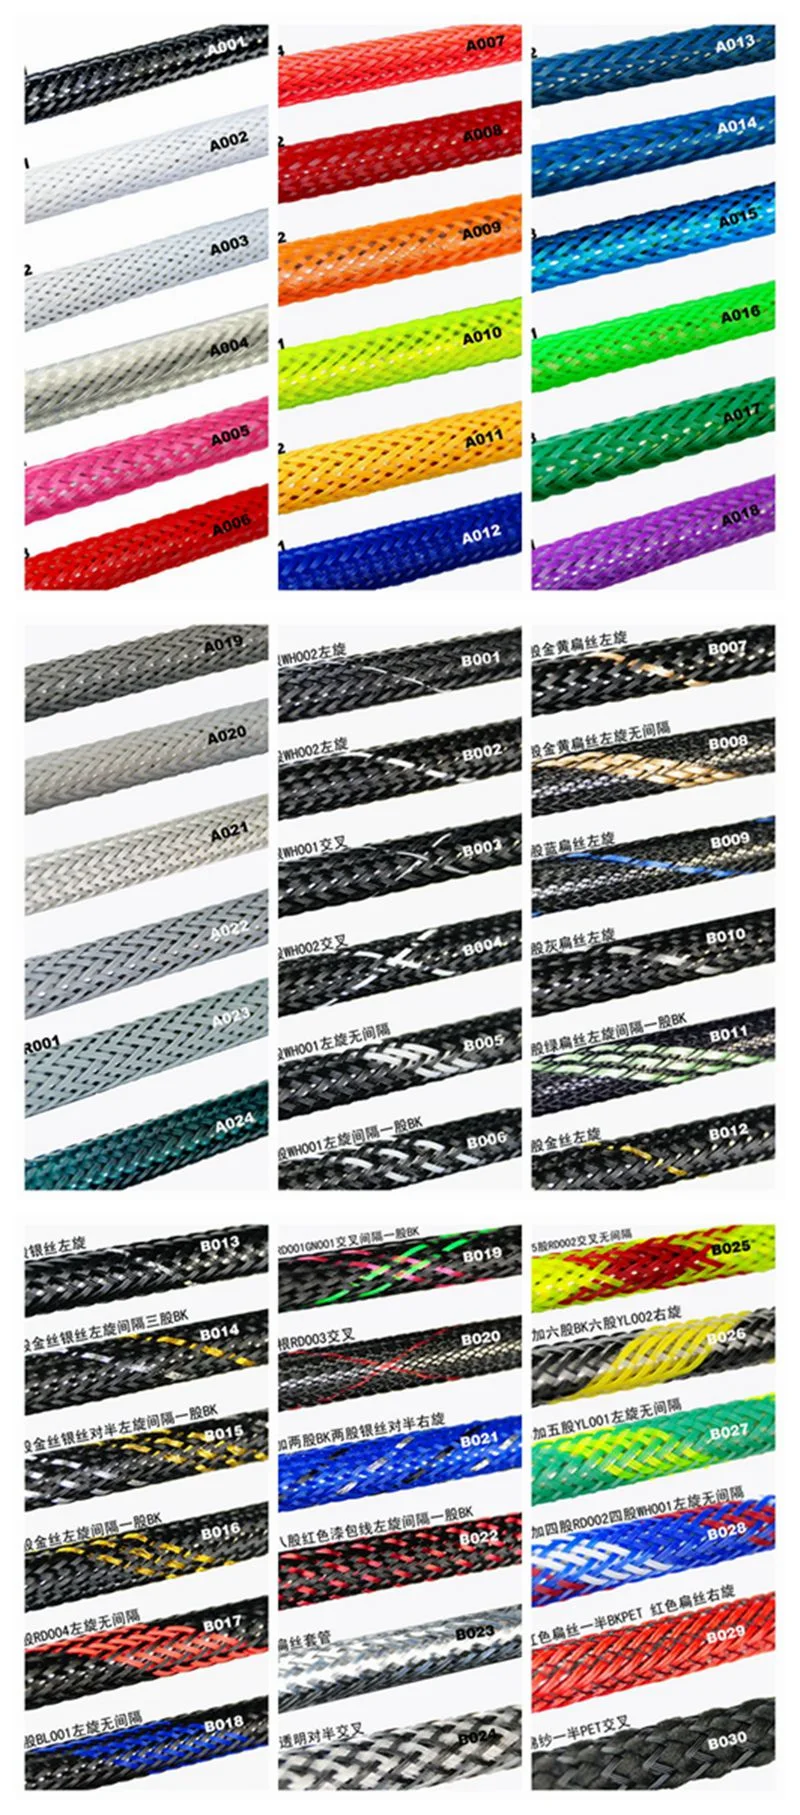 Customized Decorative Flexible Braided Cable Wire Sleeve Sheath Mesh